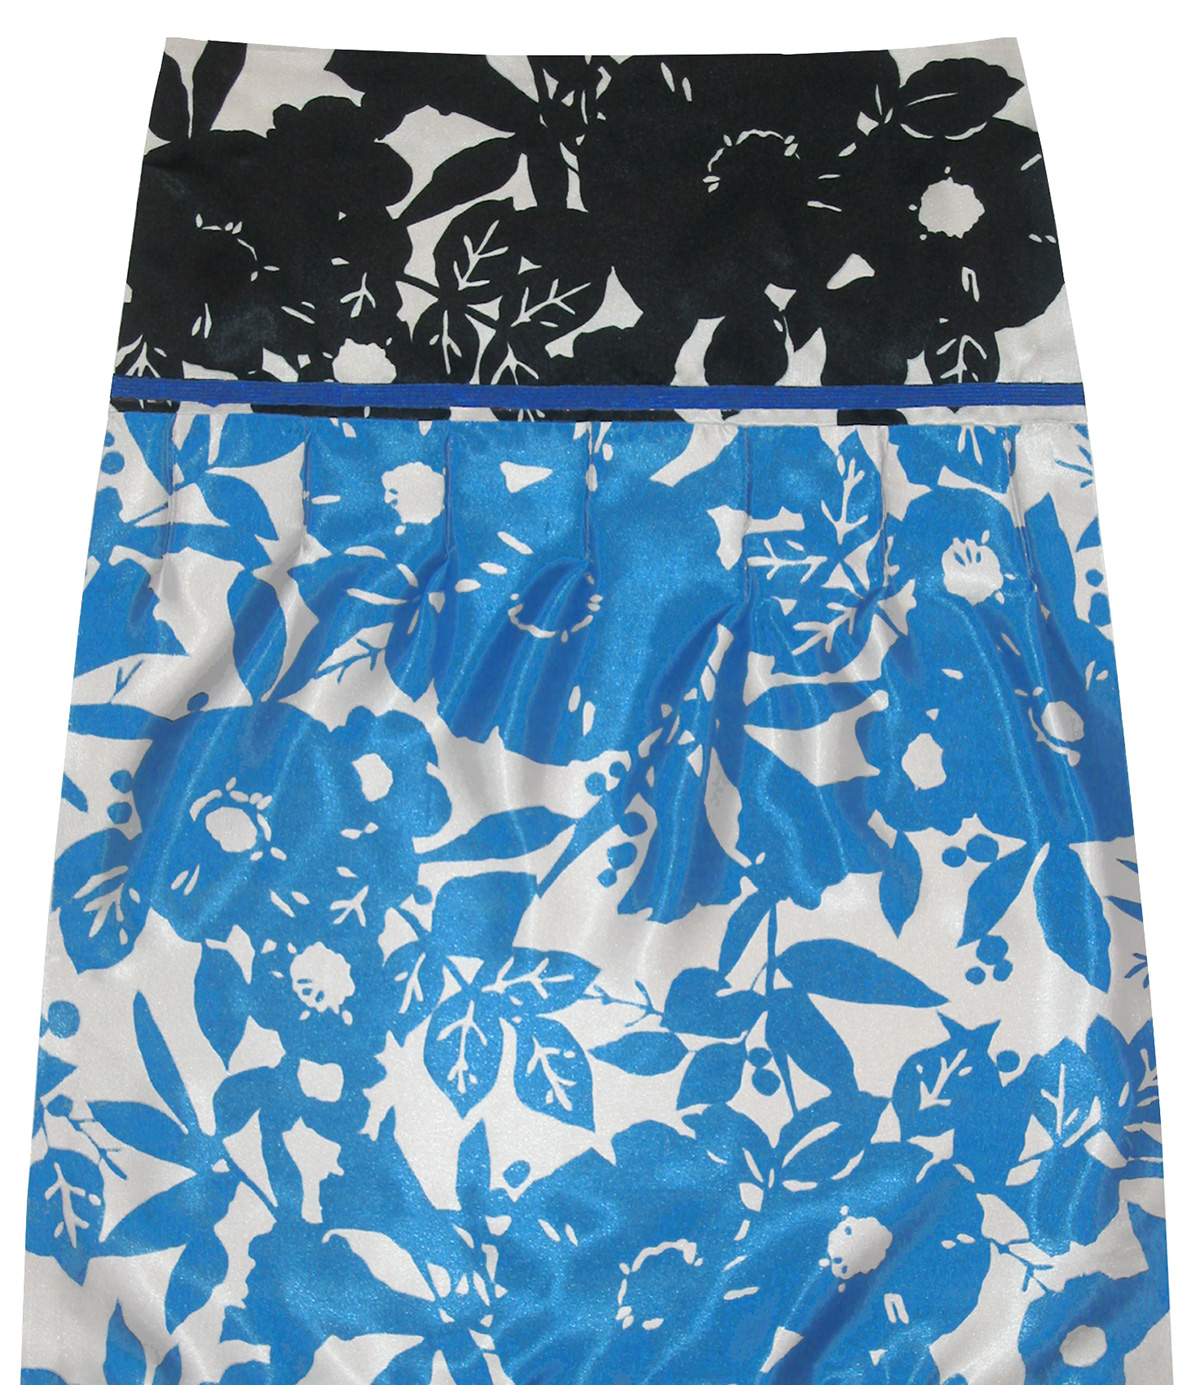 Silhouettes print floral pattern